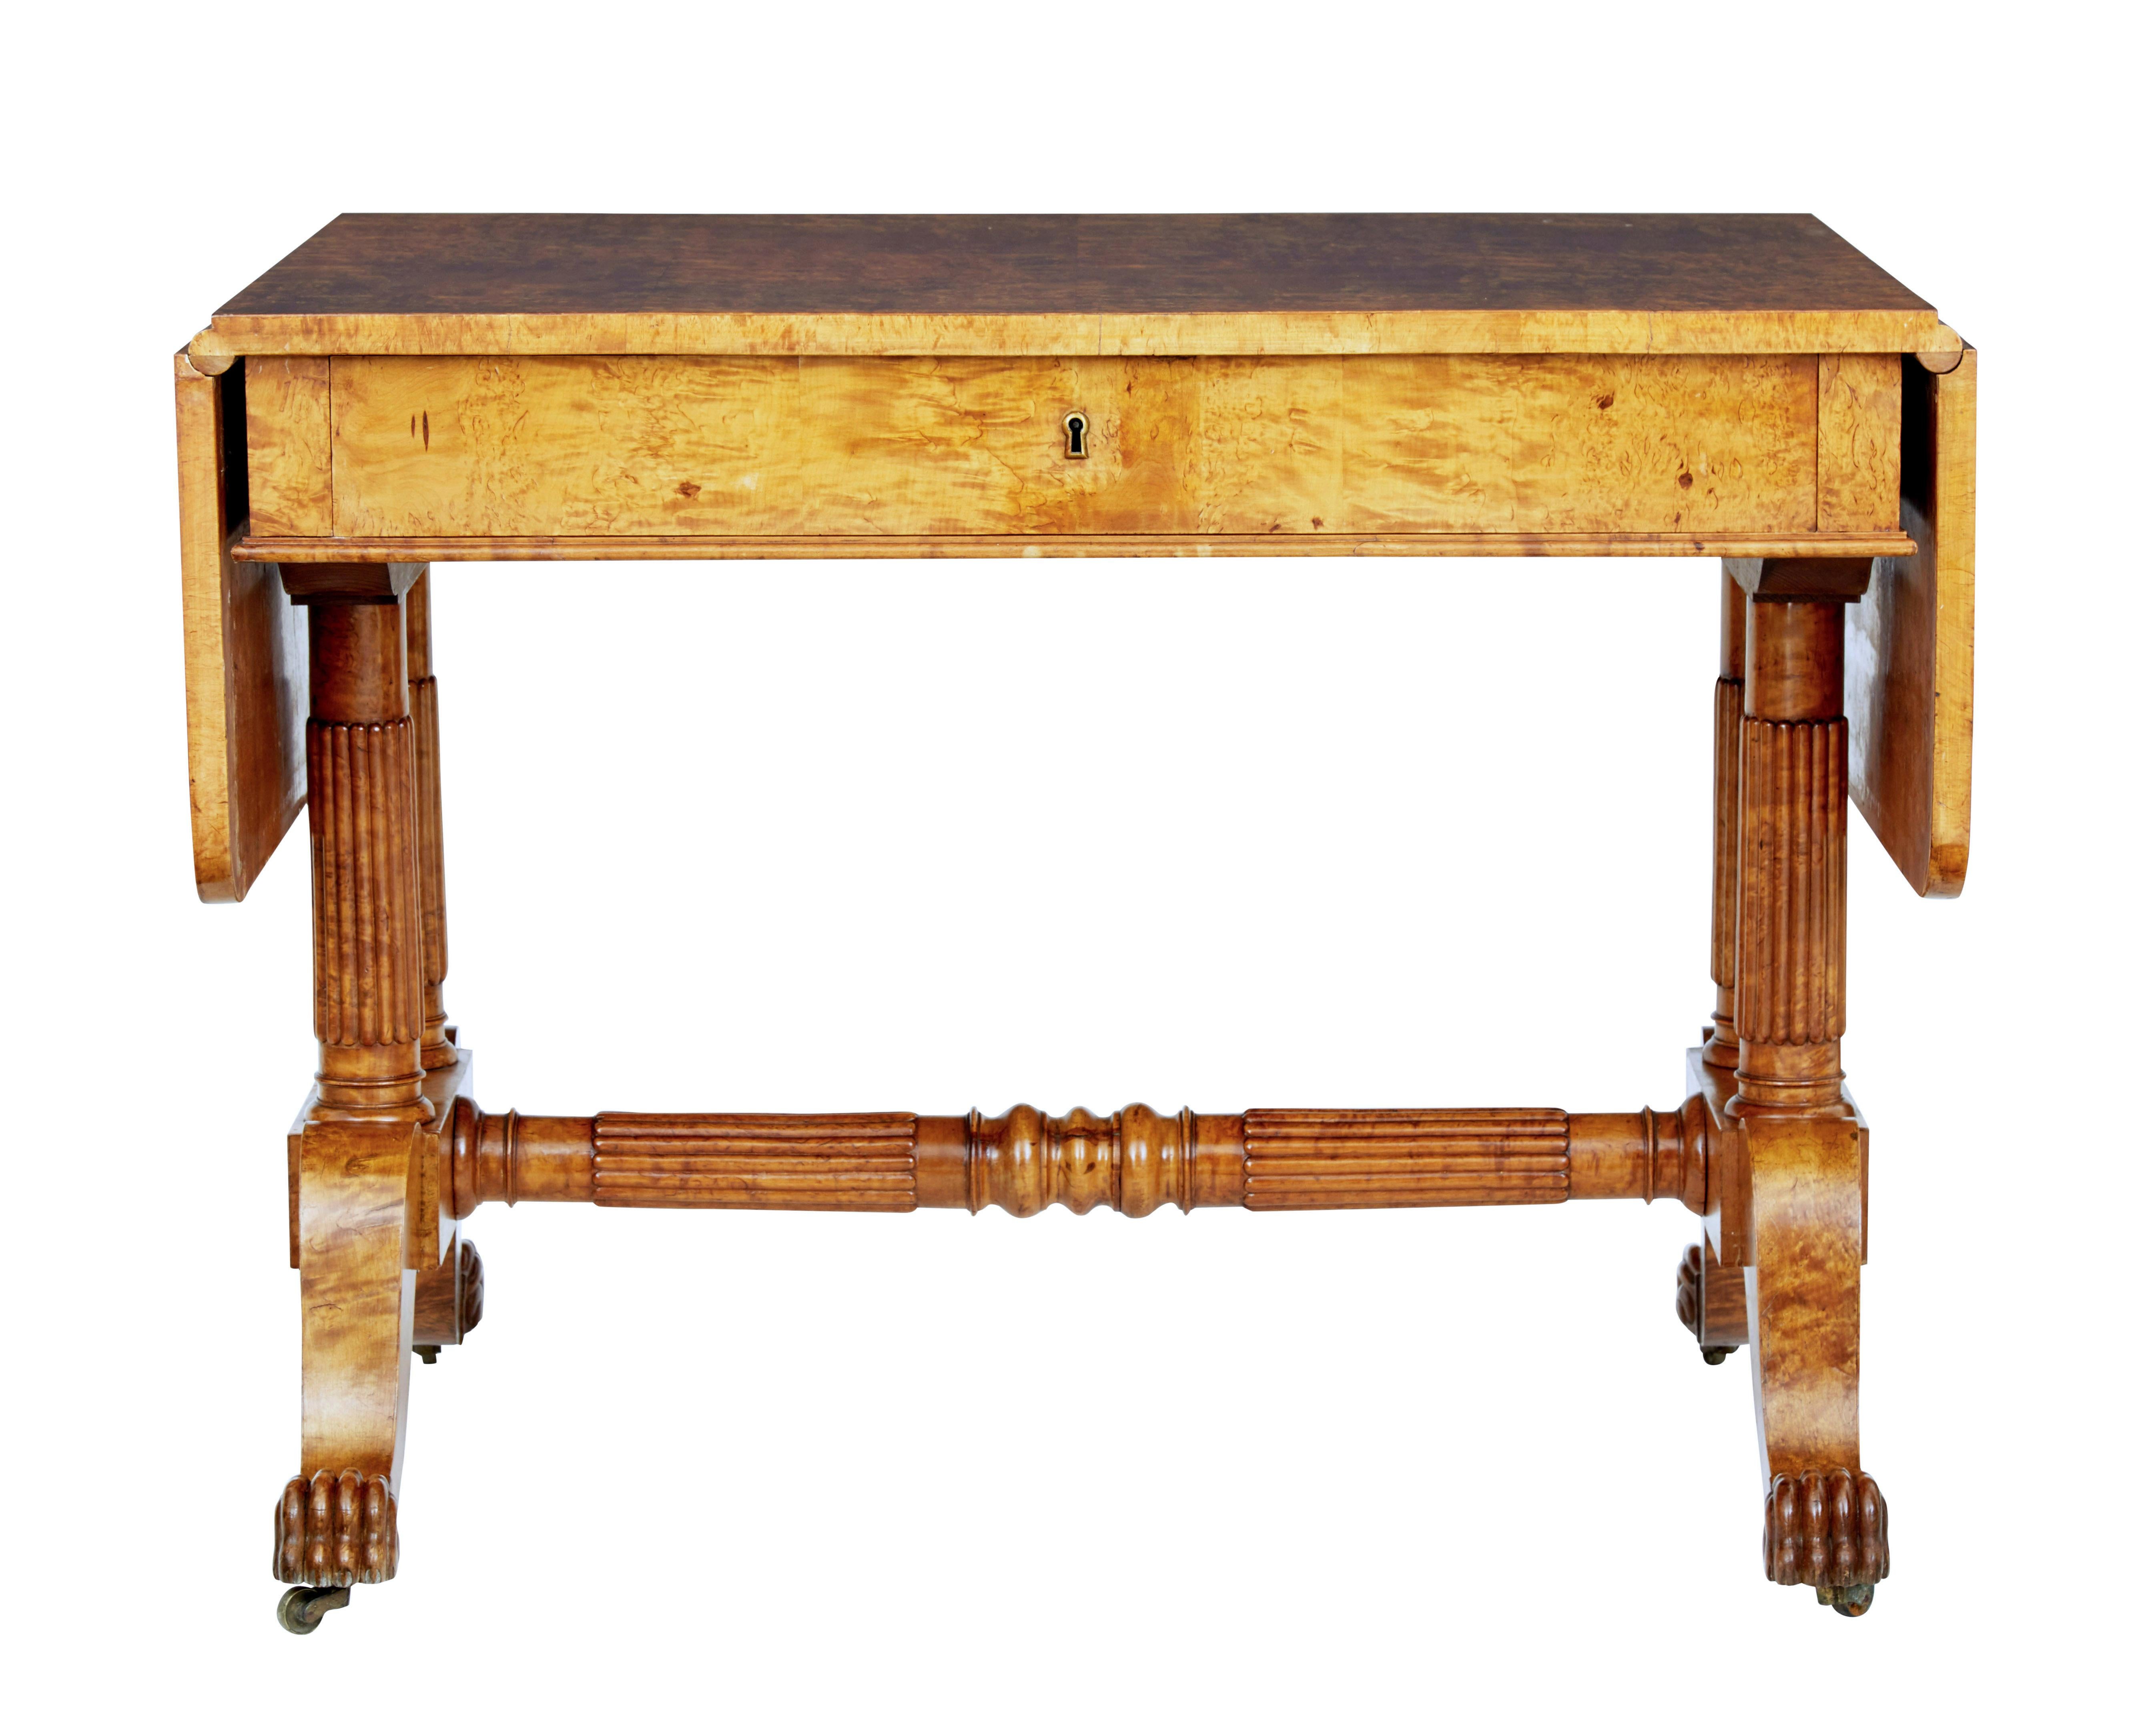 Superb quality biedermeier period sofa table circa 1825.

Beautifully made from burr birch, giving it strong grains and colour.  Drop down flaps provide a overall length of just over 63 inches.

Single deep drawer below the top surface.  Standing on